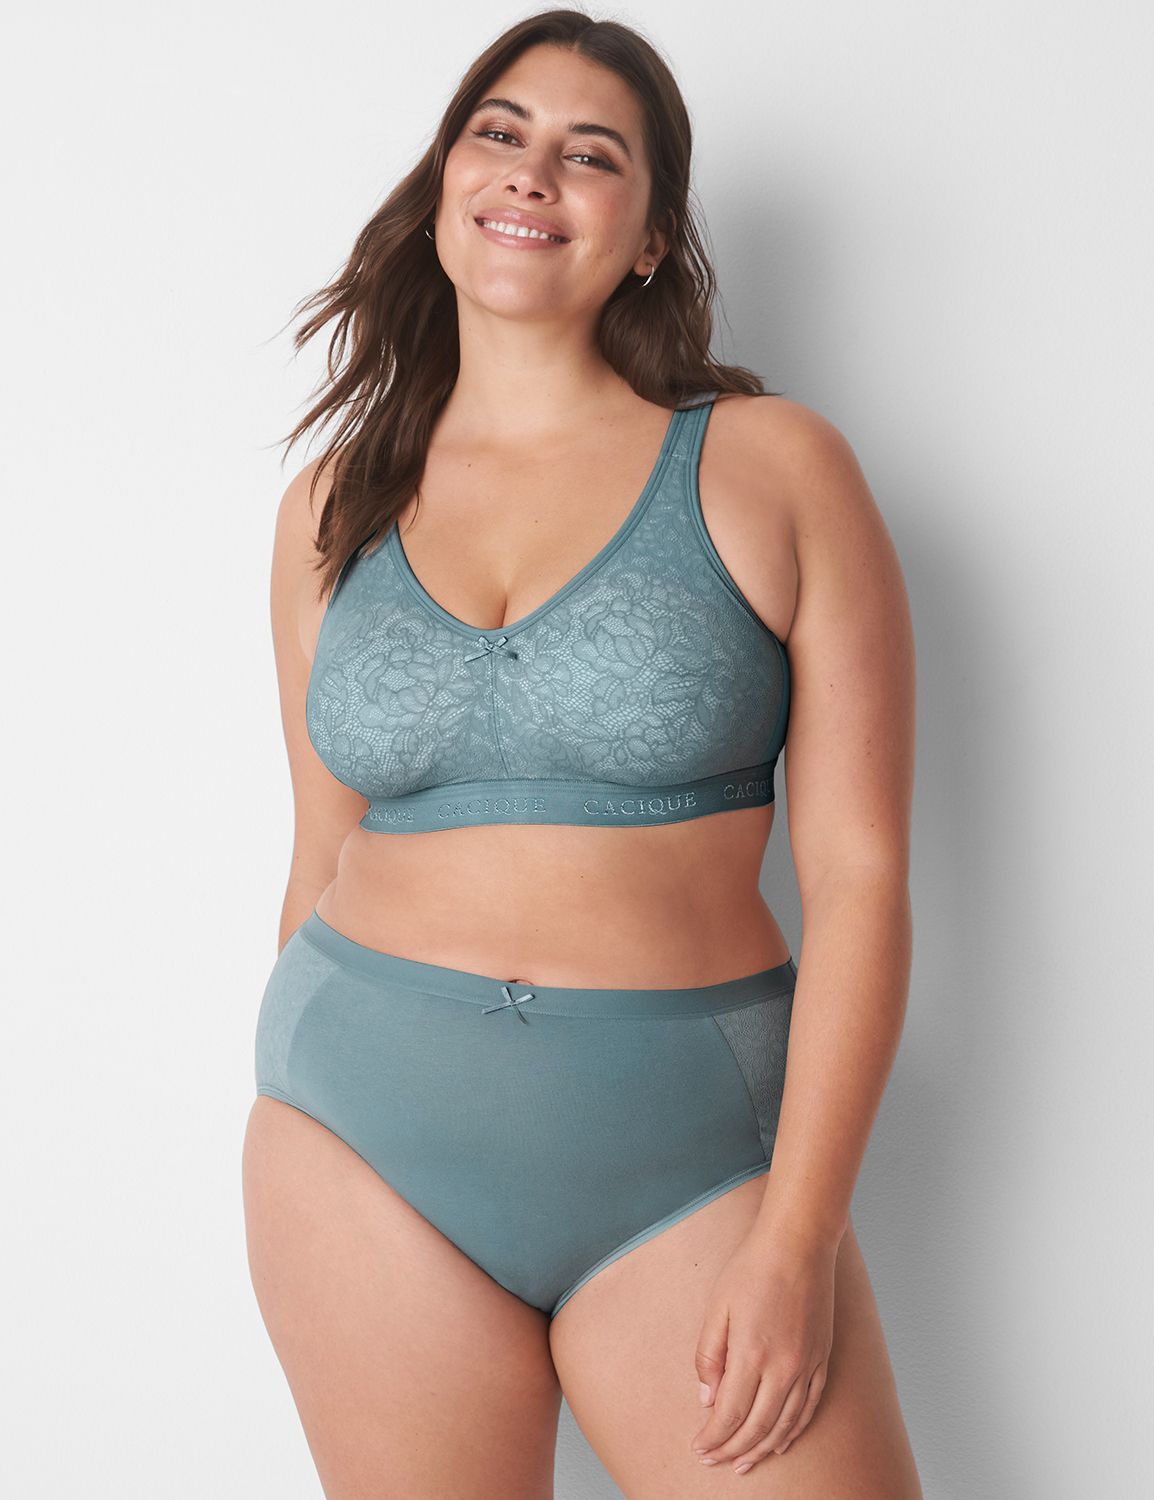 NWT LANE BRYANT CACIQUE FULL BRIEF WIDE BAND PANTIES 18/20 PANTY Sea foam  Green